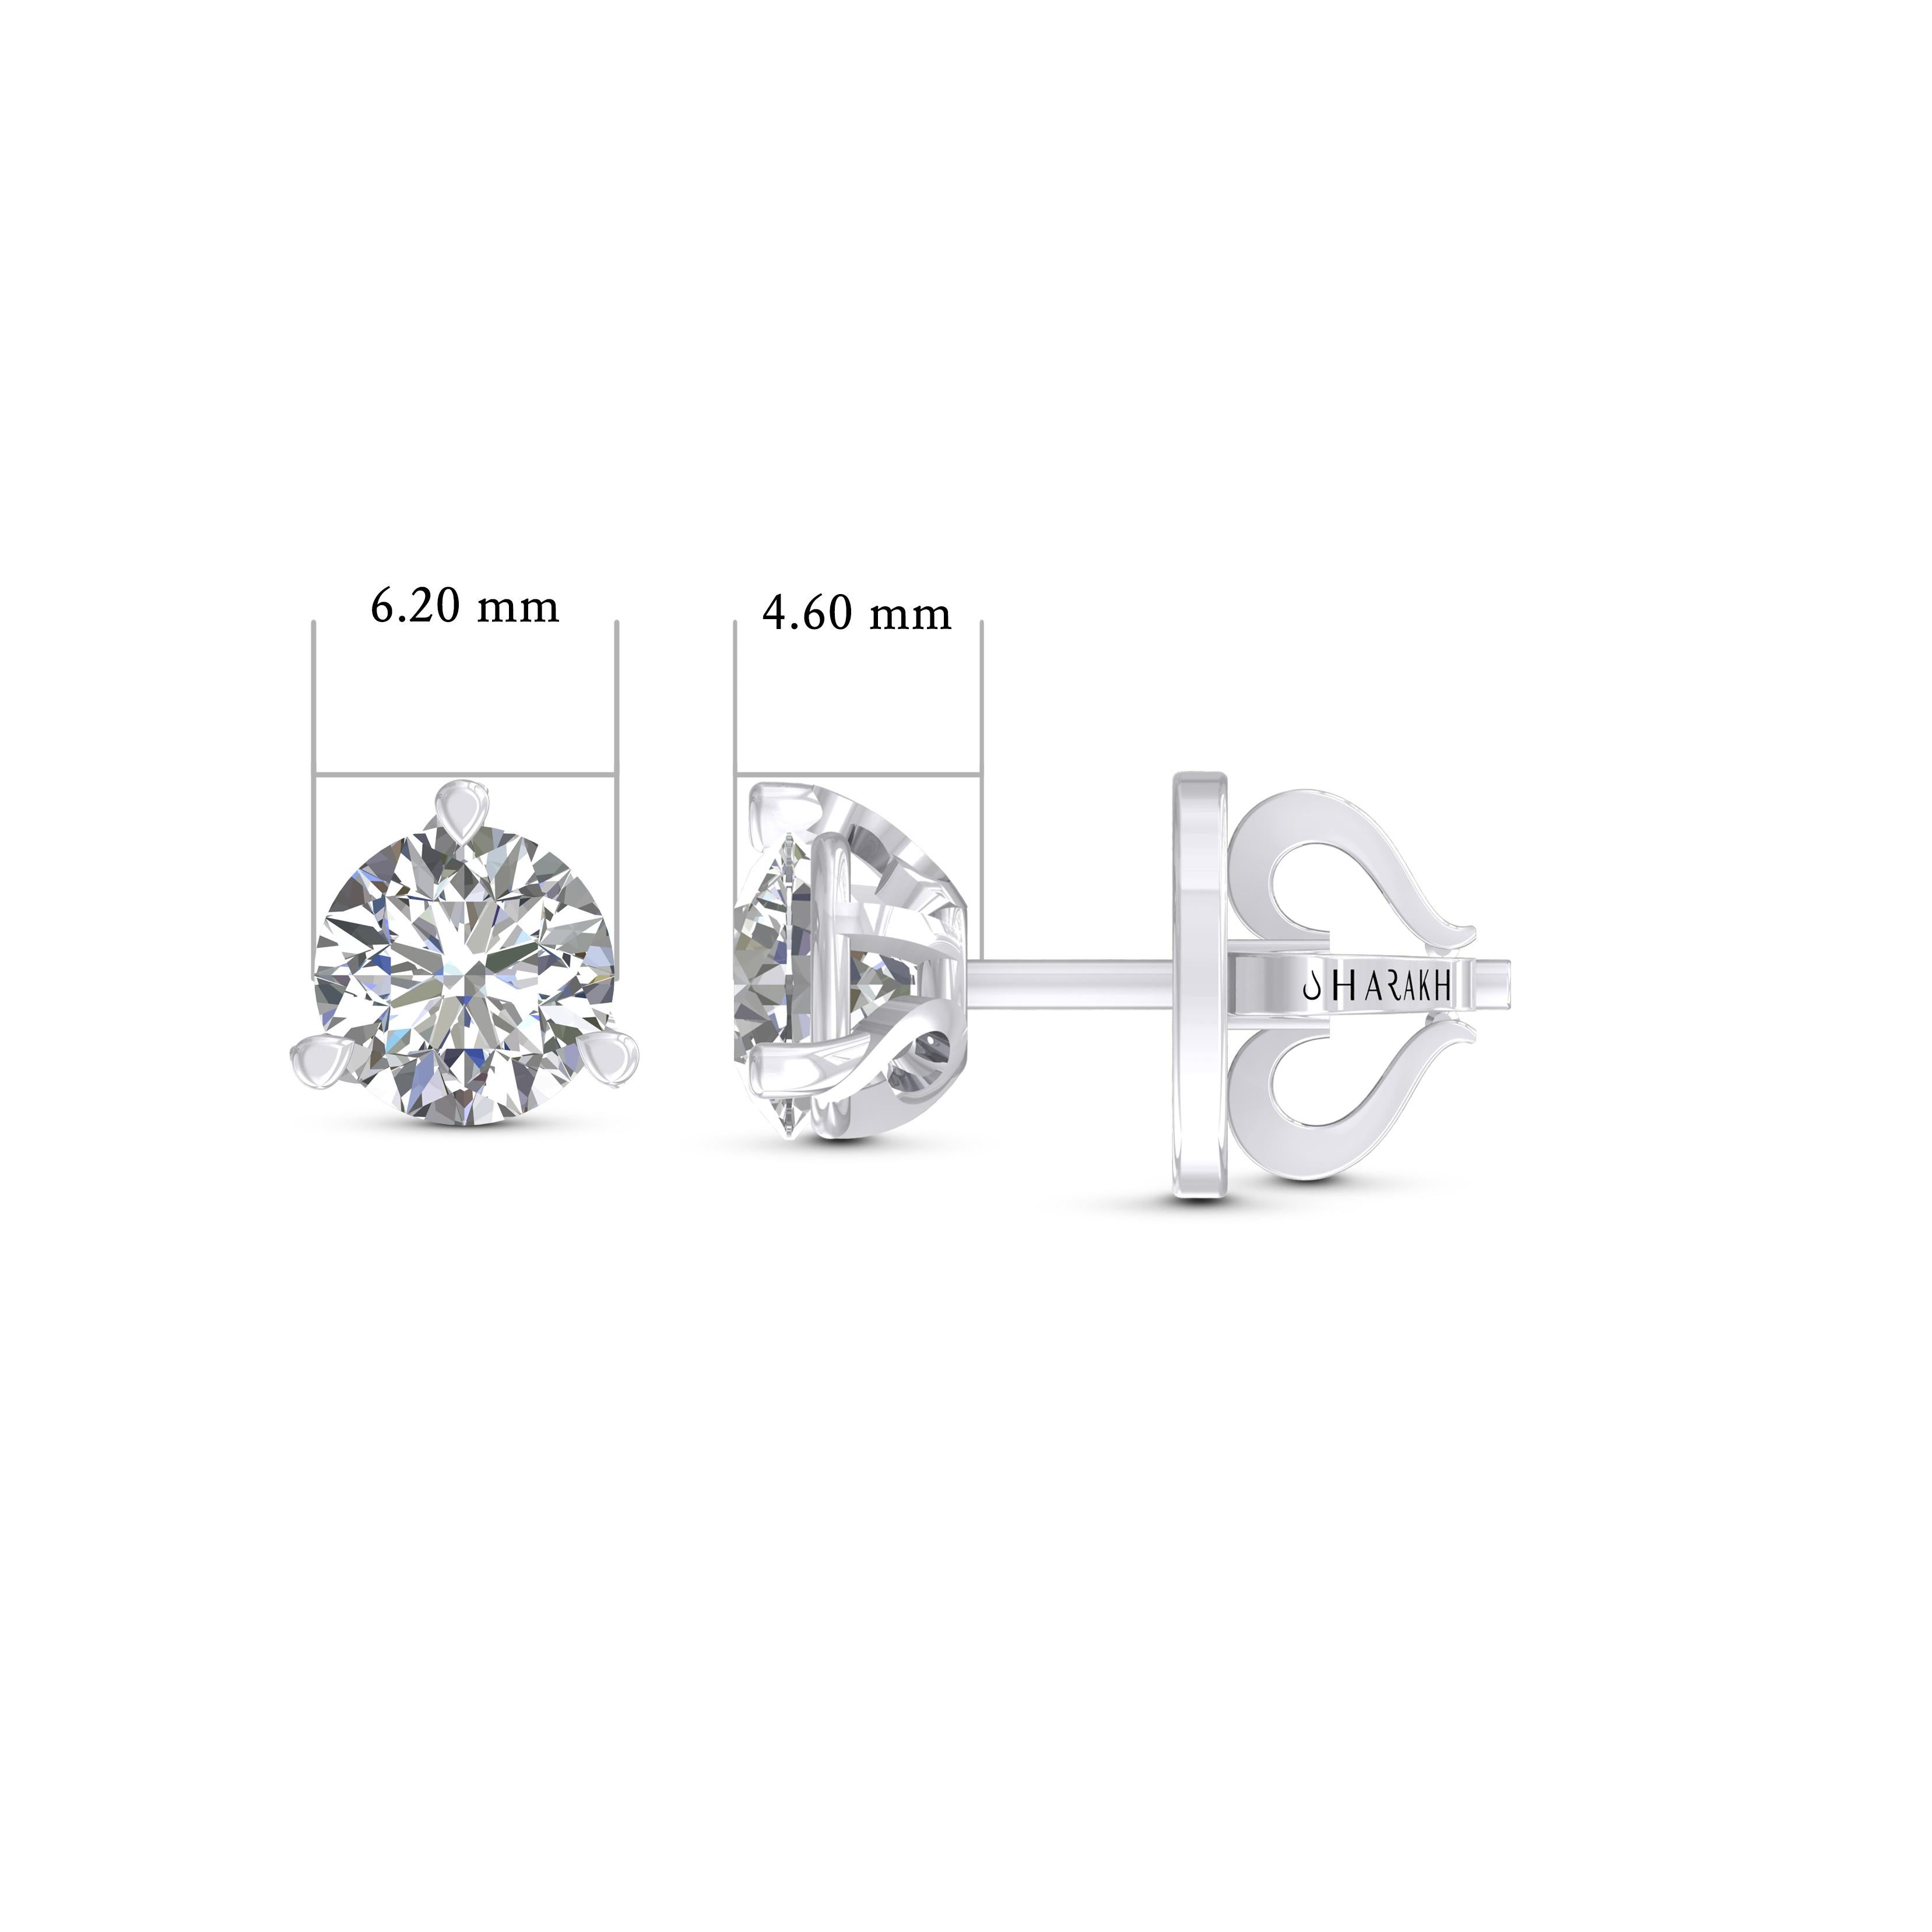 Contemporary Harakh GIA Certified 2.01 Carat F Color VS2 Clarity 18 KT Diamond Stud Earrings